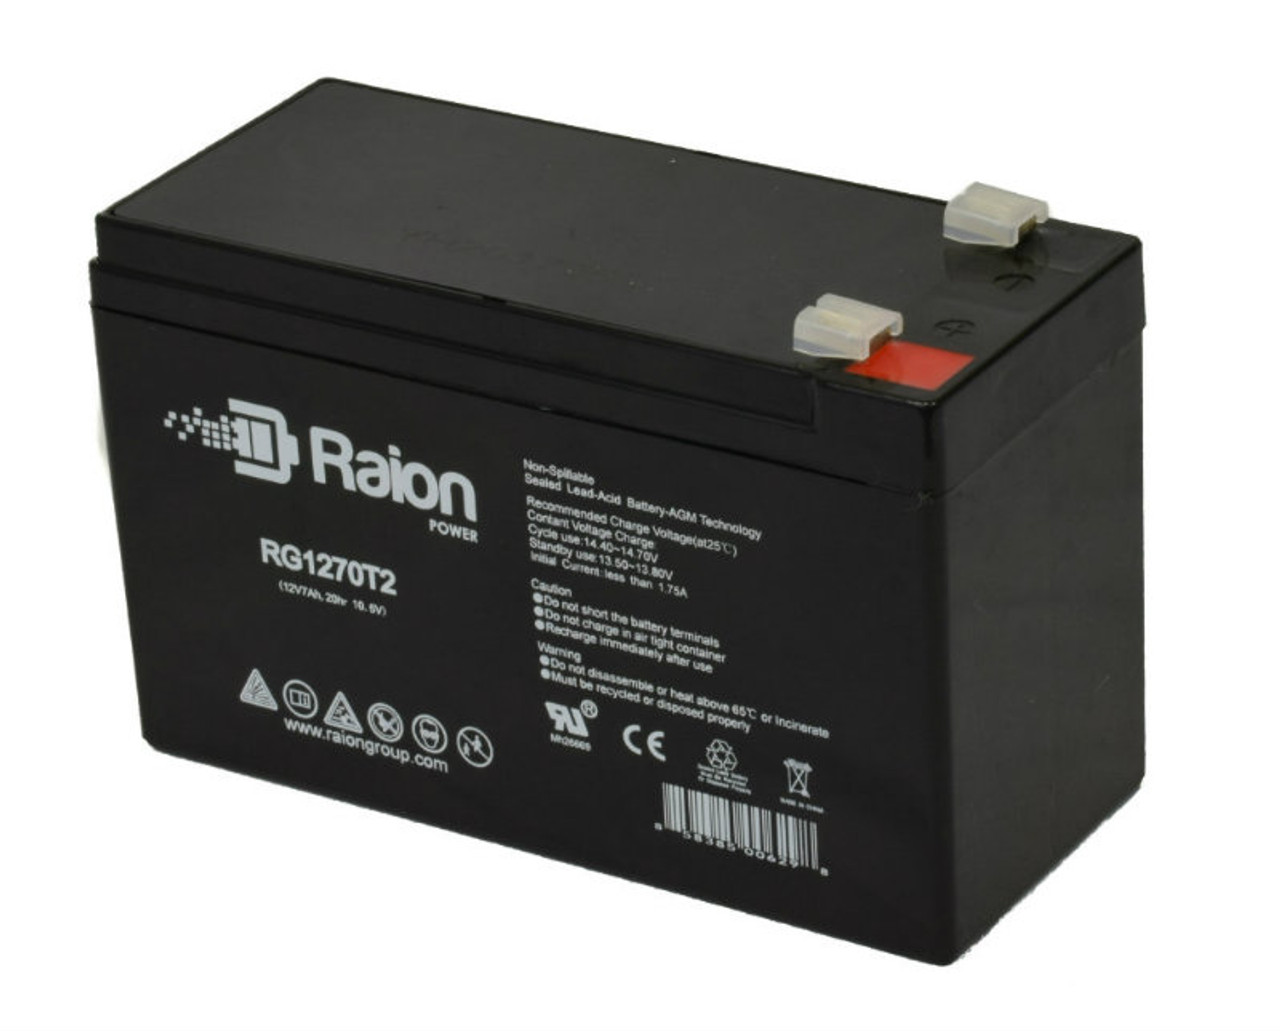 Raion Power Replacement 12V 7Ah RG1270T1 Fire Alarm Battery for Altronix SMP5PMCTXPD16CB